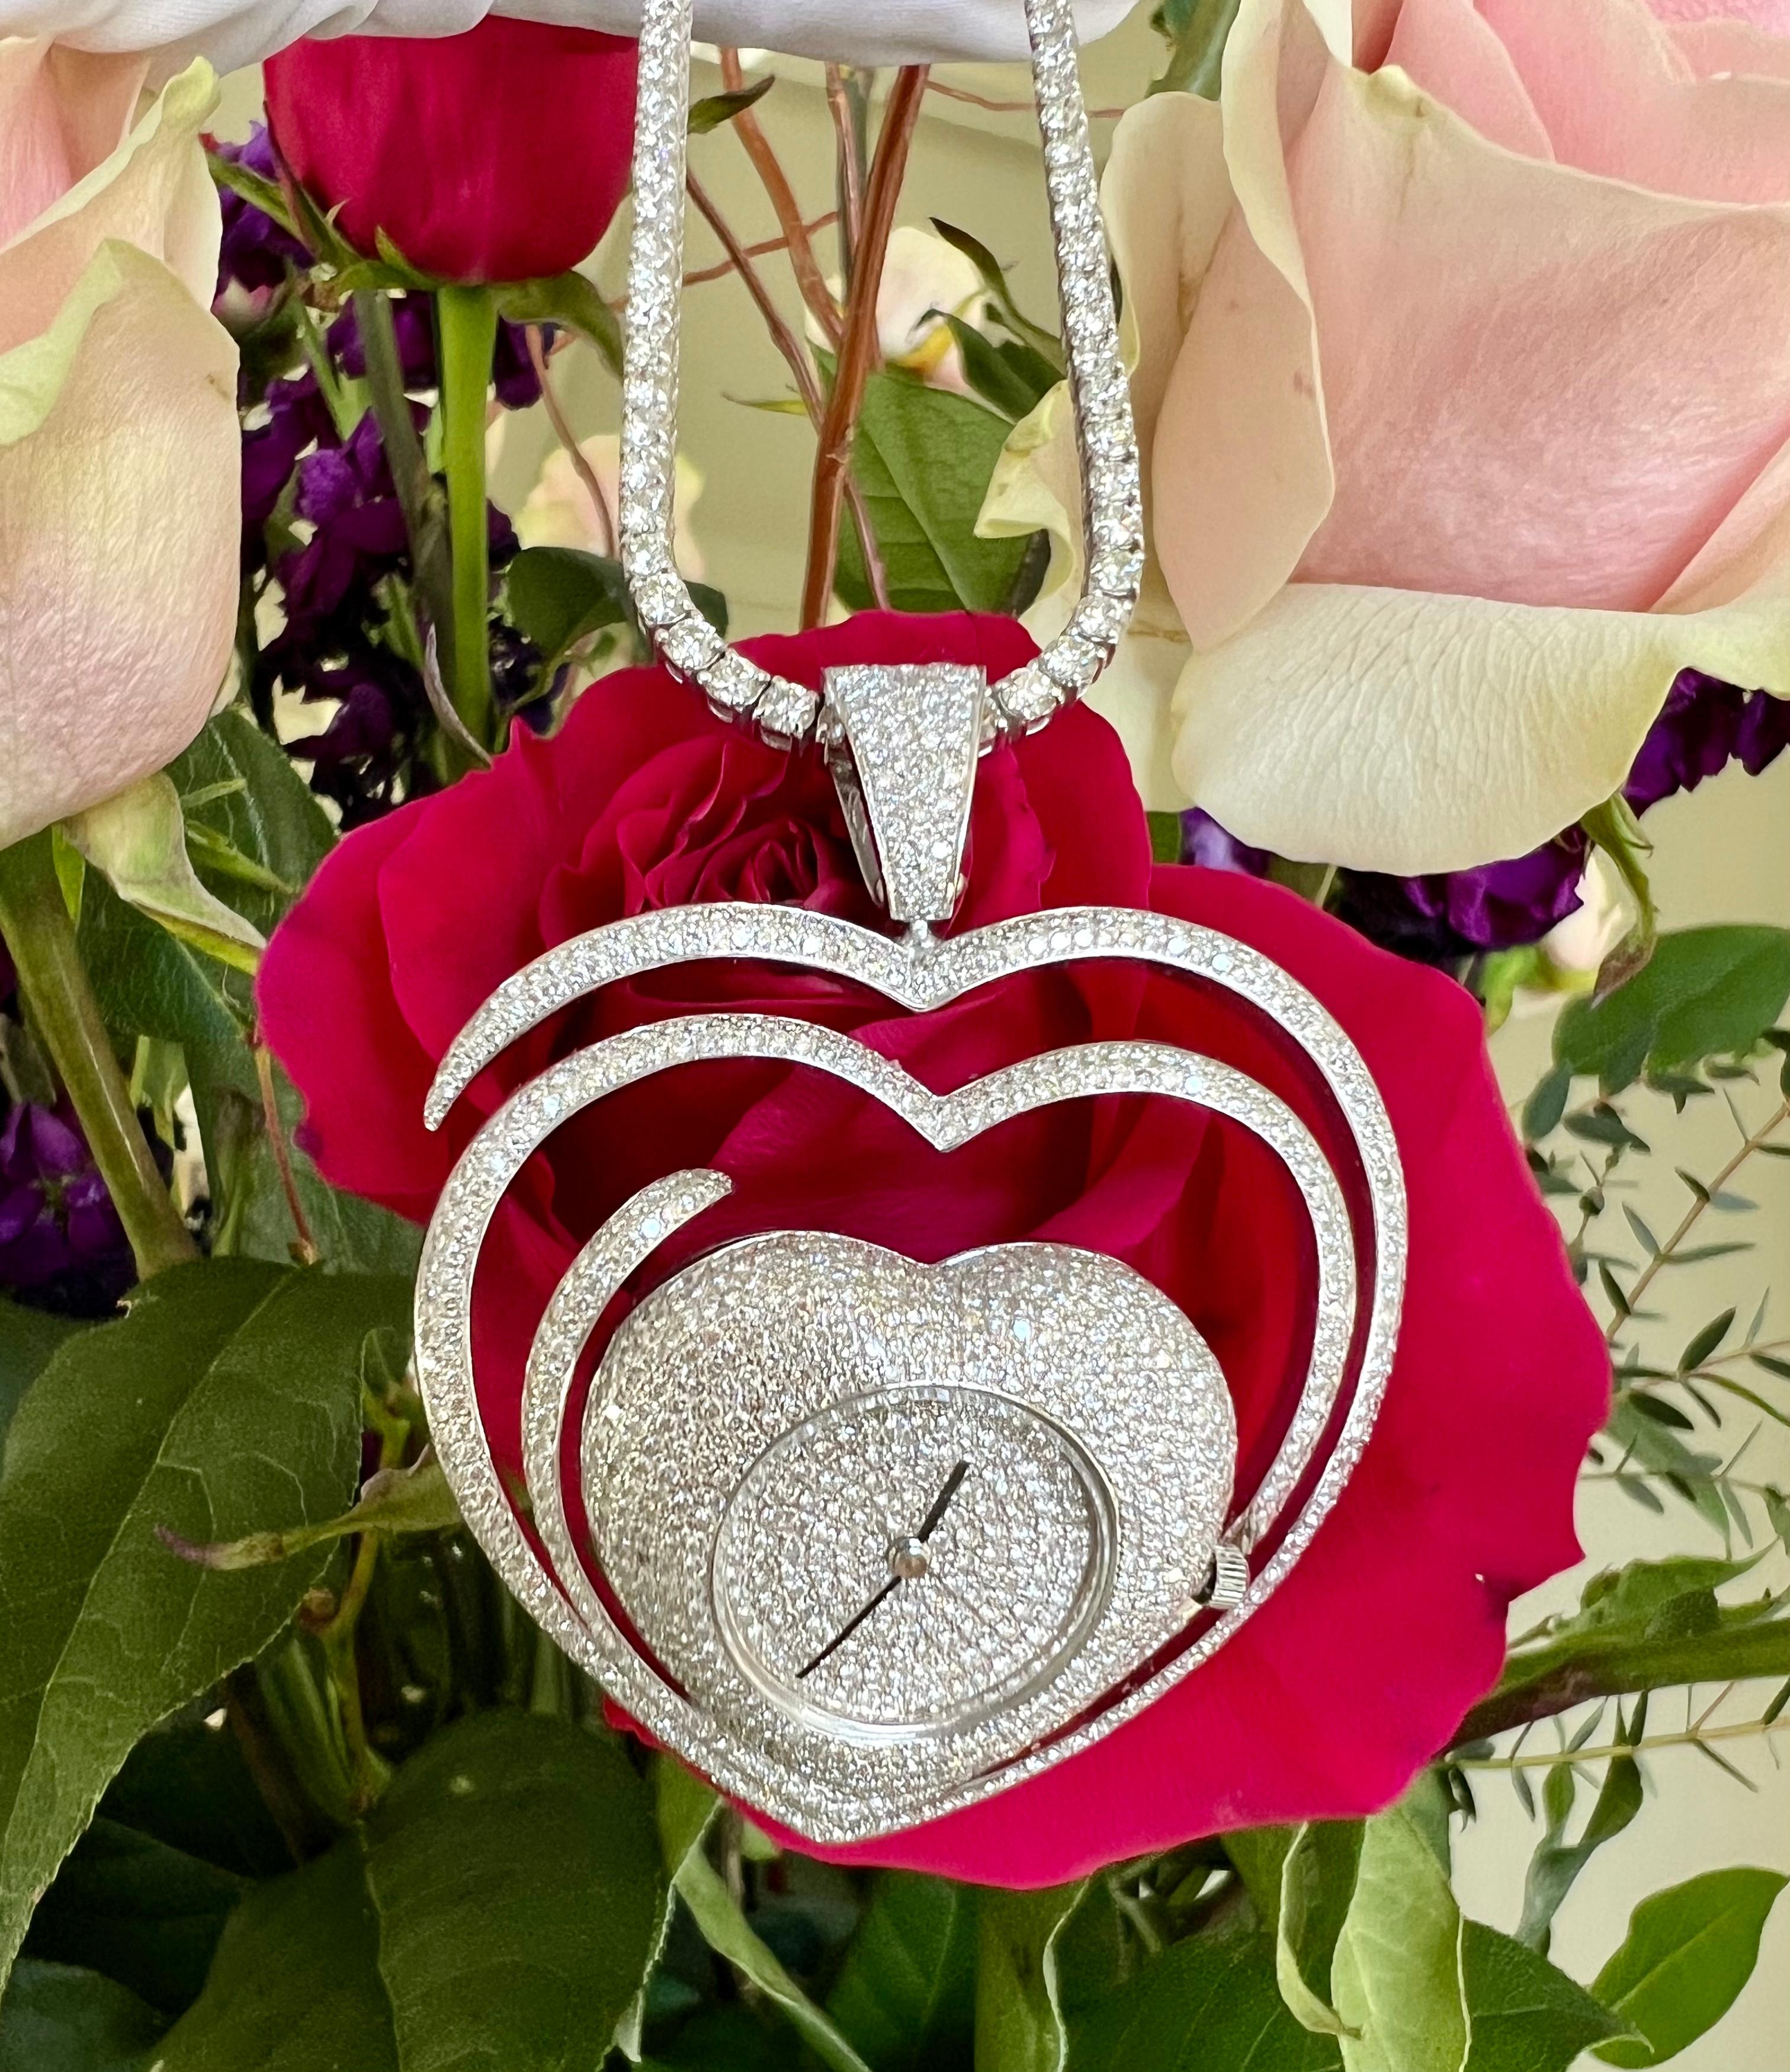 Magnificent and very unique, hand crafted estate heavy 18 karat white gold pave diamond heart shaped watch pendant features a myriad of over 1200 round brilliant white diamonds creating a captivating burst of the most glistening beauty to be worn on